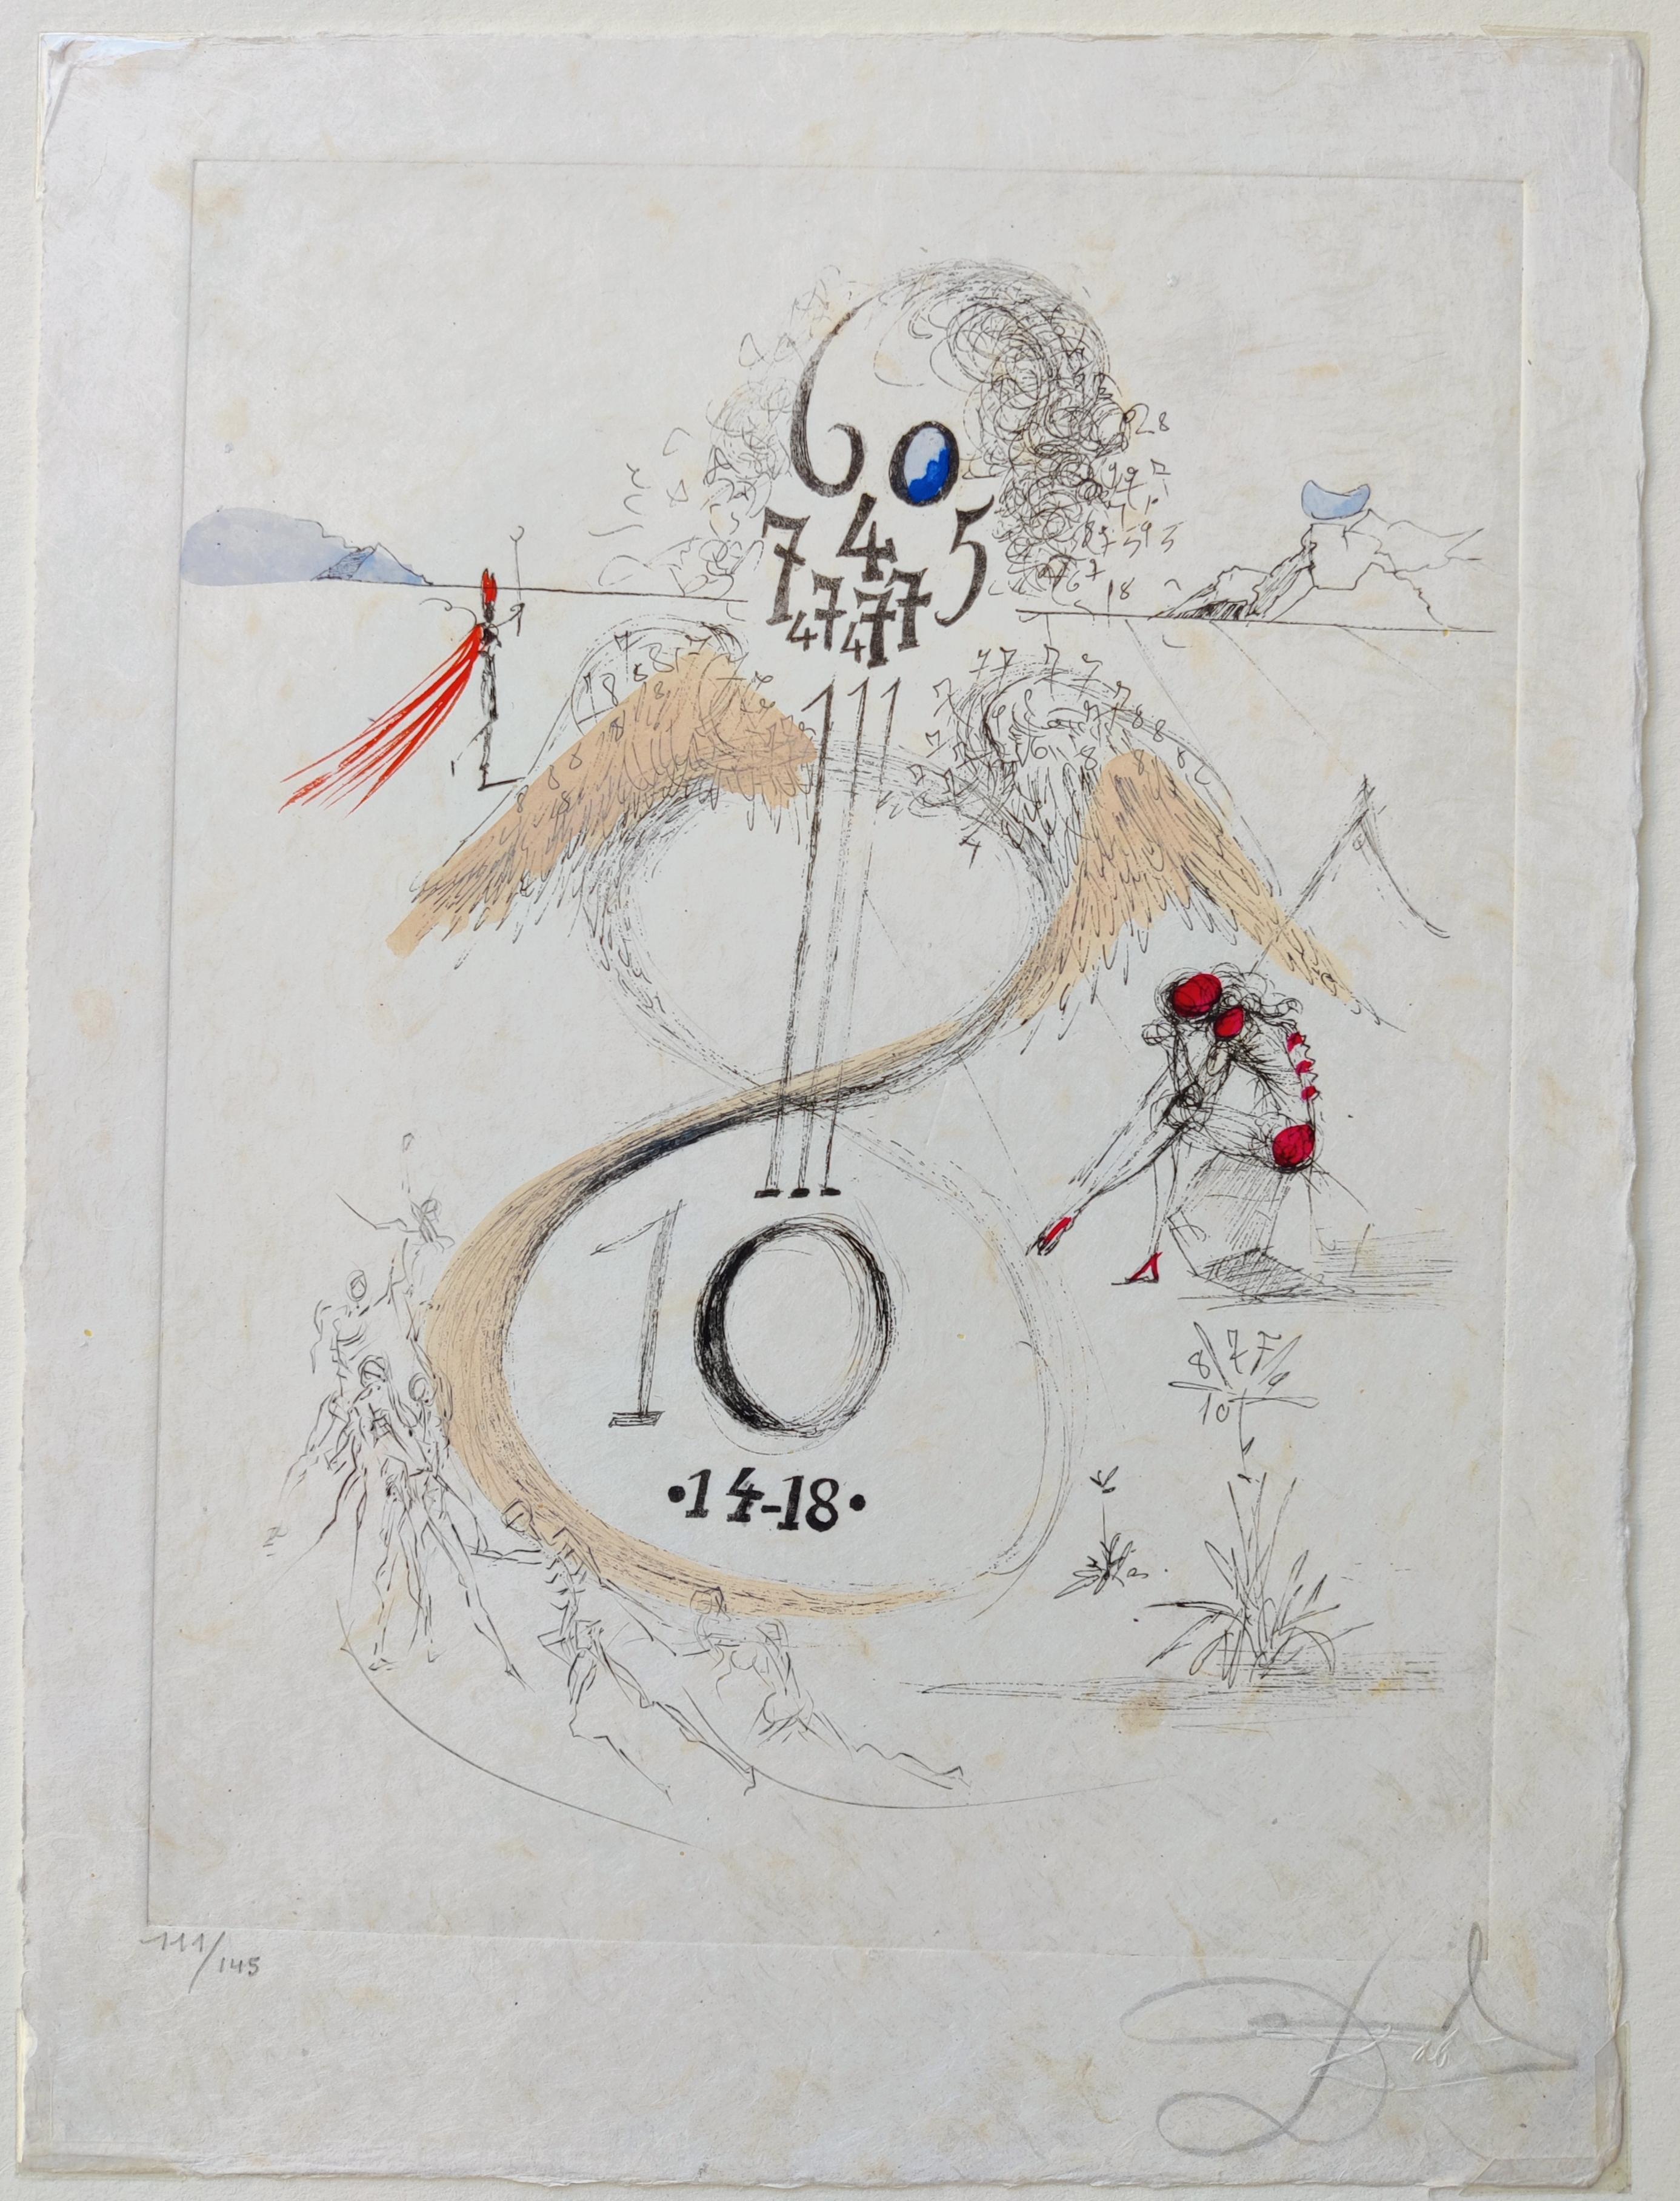 Salvador Dali 
The 1914-1918 War  (Guerre de 1914-18) from the "Secret Poems by Apollinaire" suite, 1967
Hand-colored drypoint etching on Dali blind stamp Japon paper 
Signed lower right and numbered lower left "111/145"
Sheet size: 15 1/4" x 11